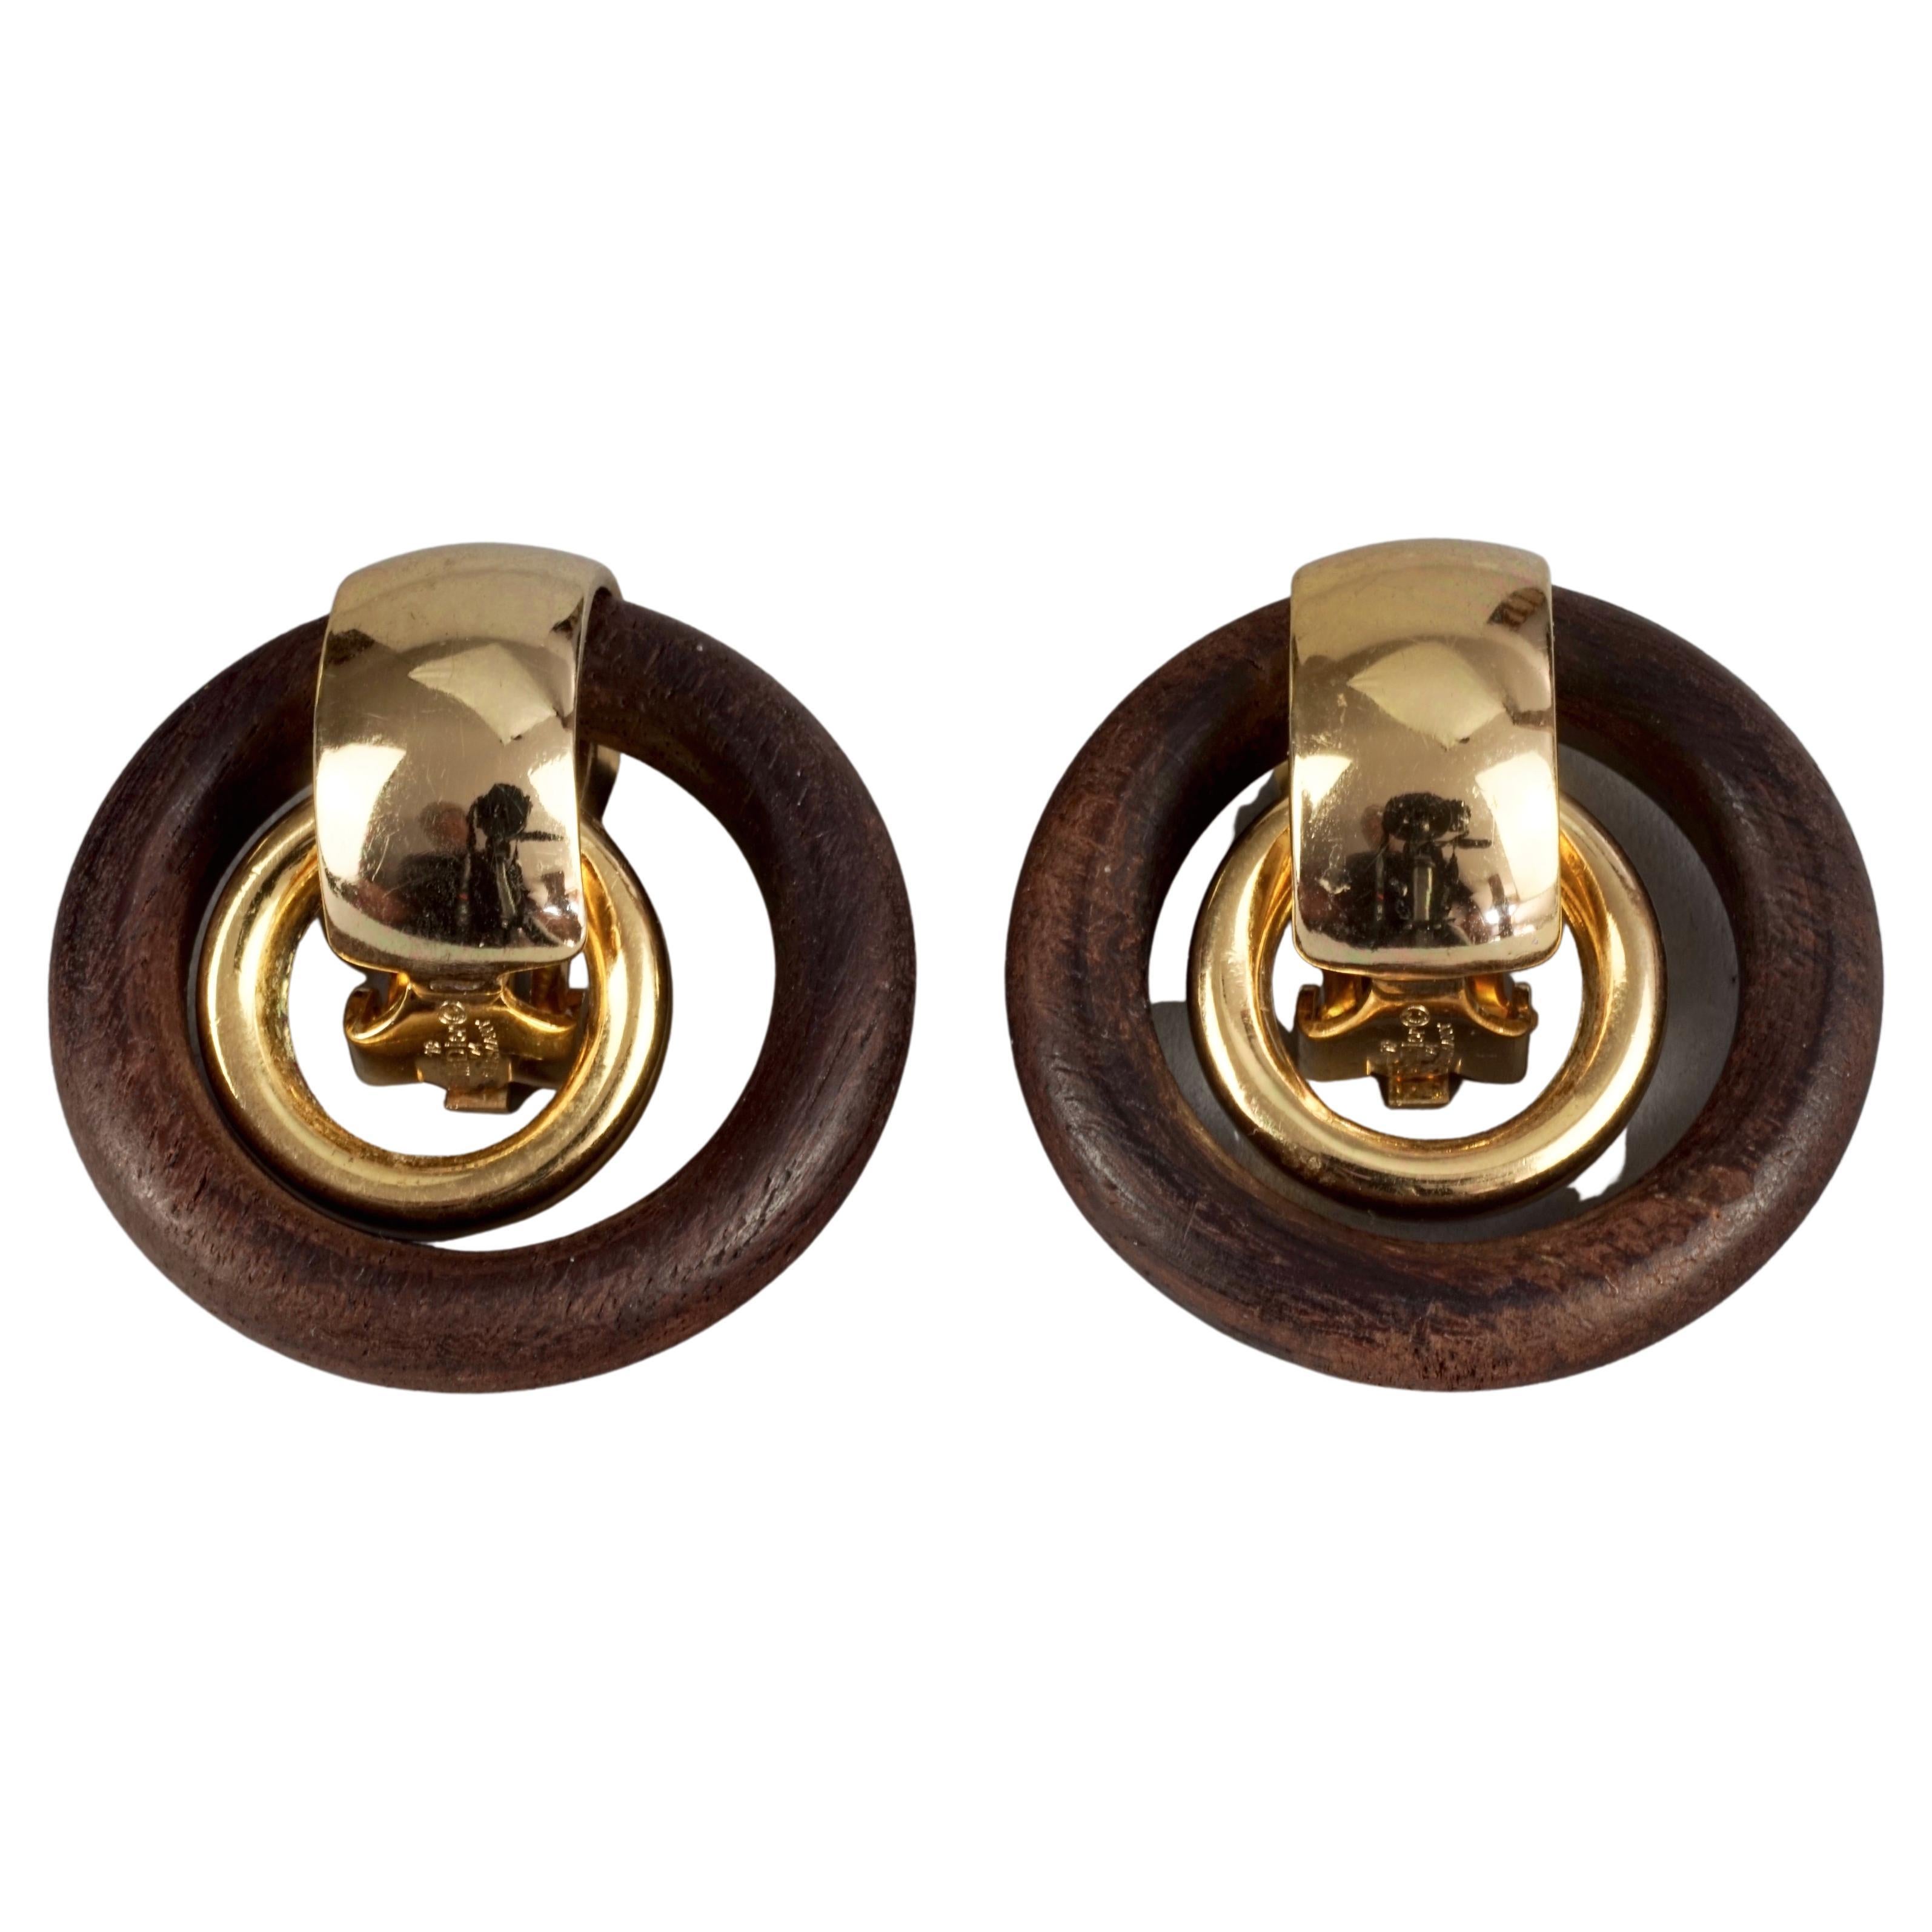 Vintage 1974 CHRISTIAN DIOR Wooden Gilt Double Hoop Earrings For Sale